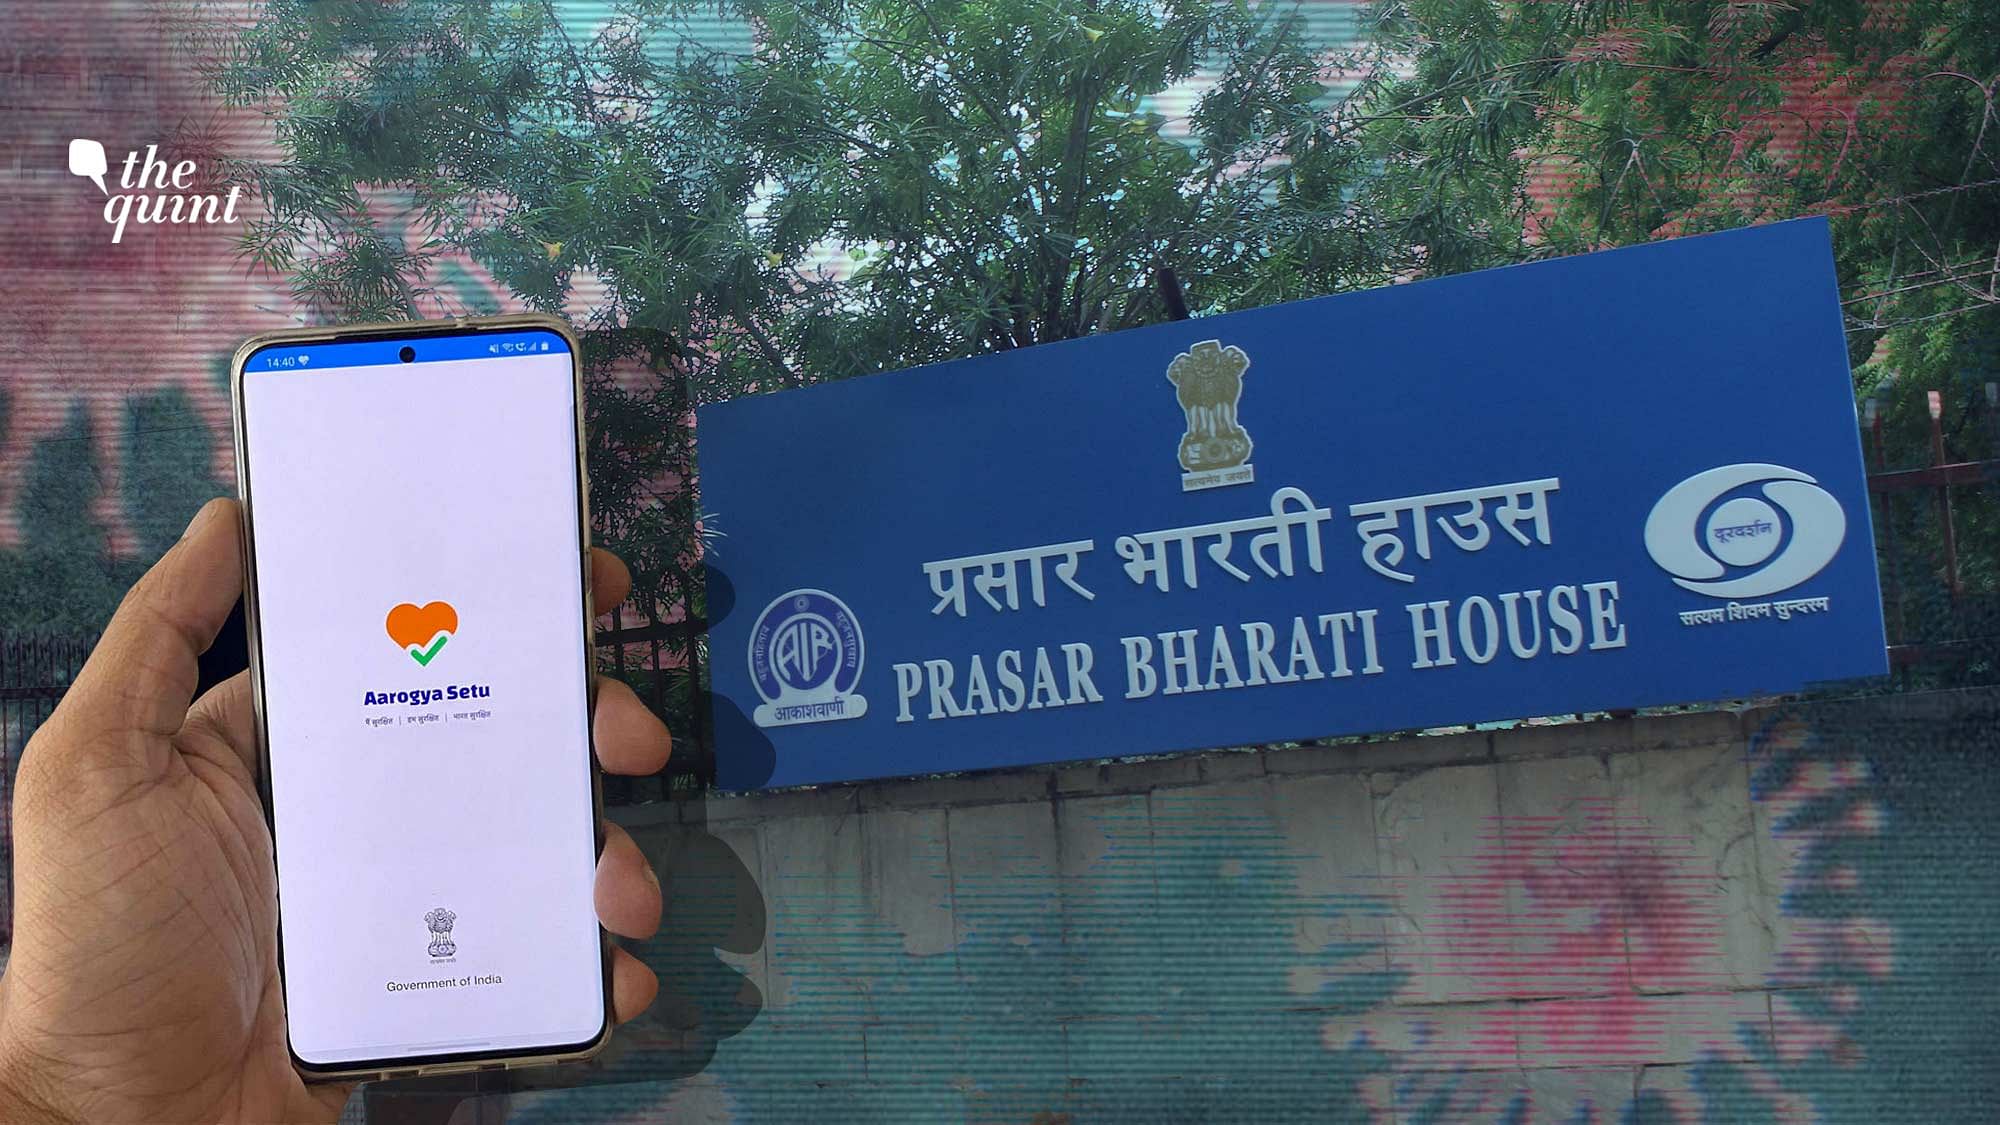 Aarogya Setu app, which has been flagged for major privacy concerns of profiling and surveillance, has to be installed by both, field reporters as well as the office staff of Prasar Bharati.